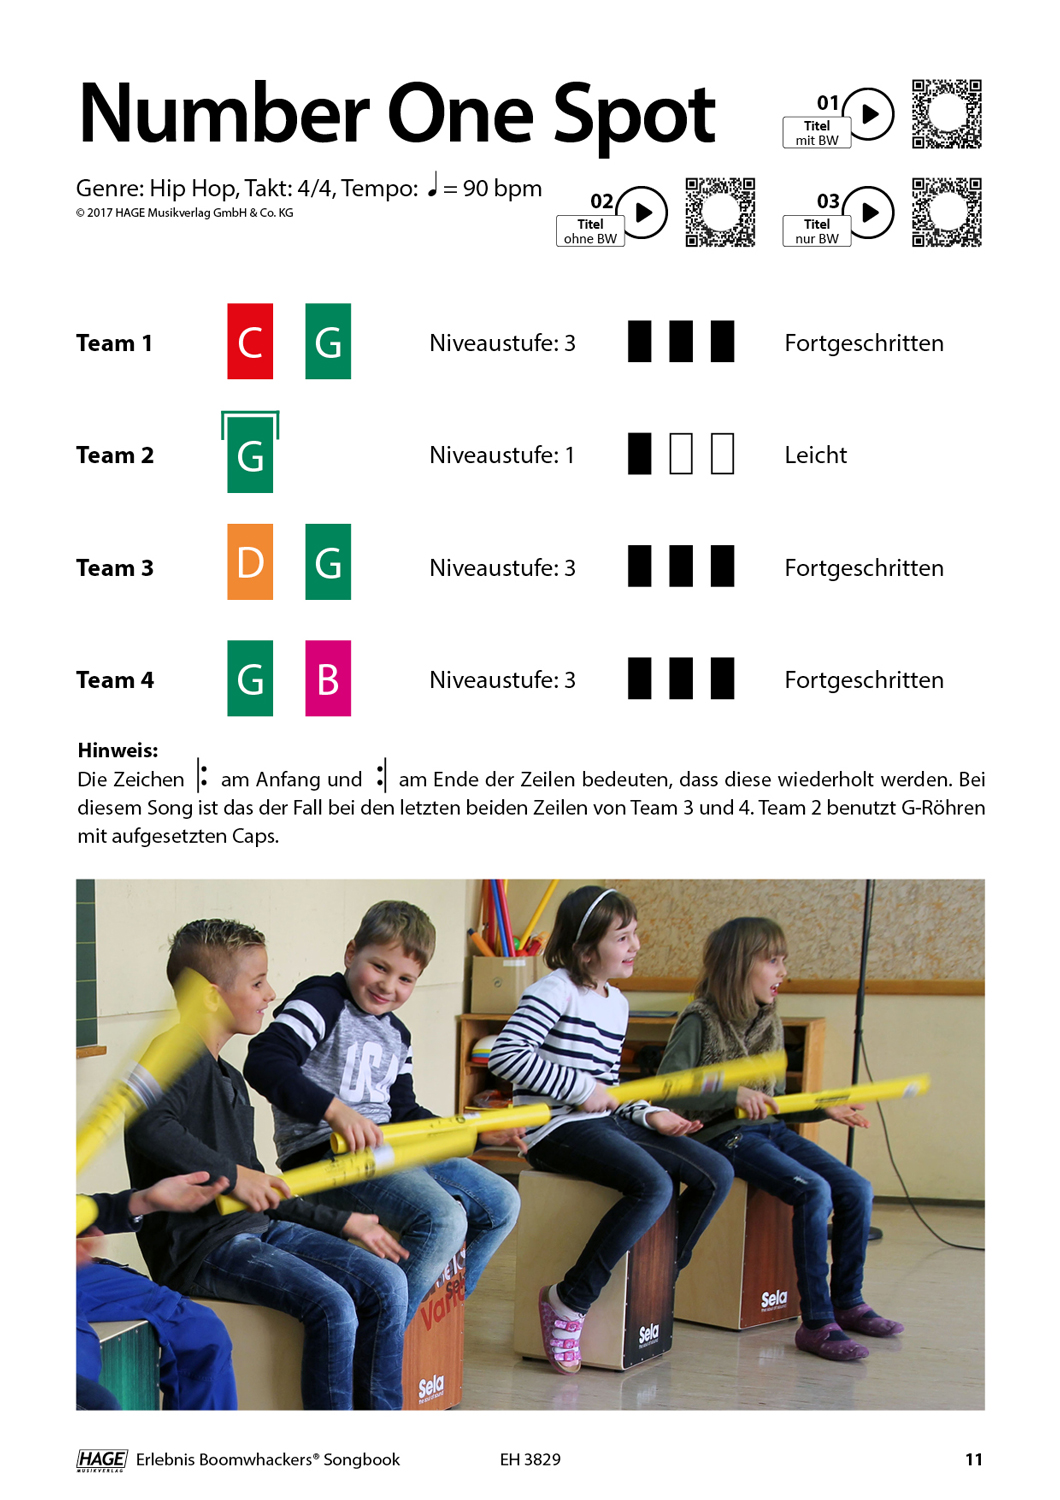 Erlebnis Boomwhackers® Songbook Pages 6